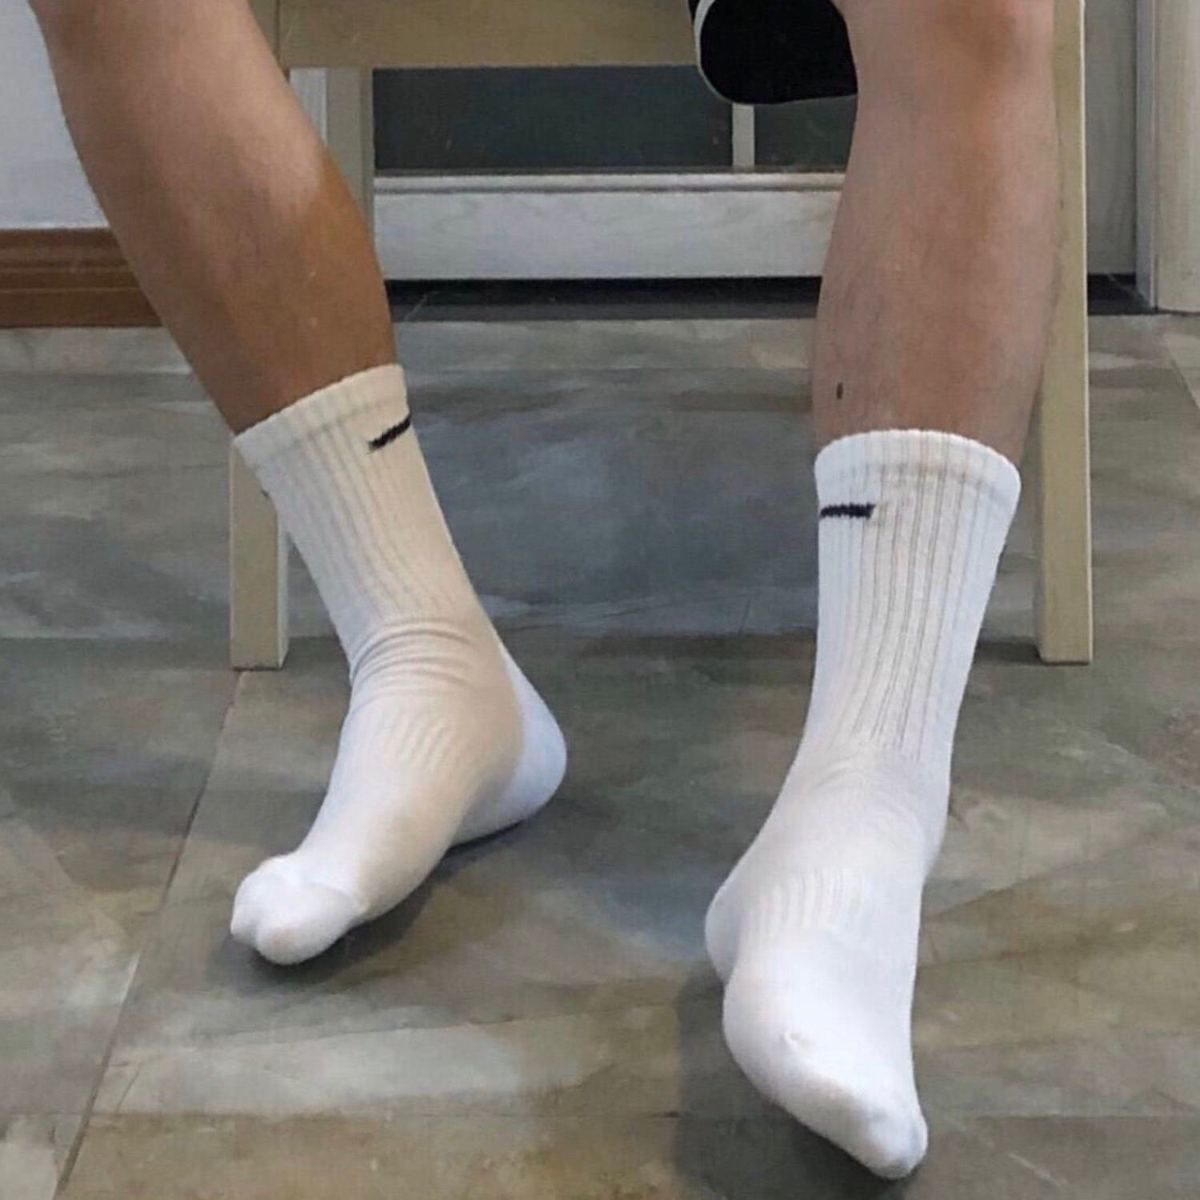 One pair of socks and no shoes.